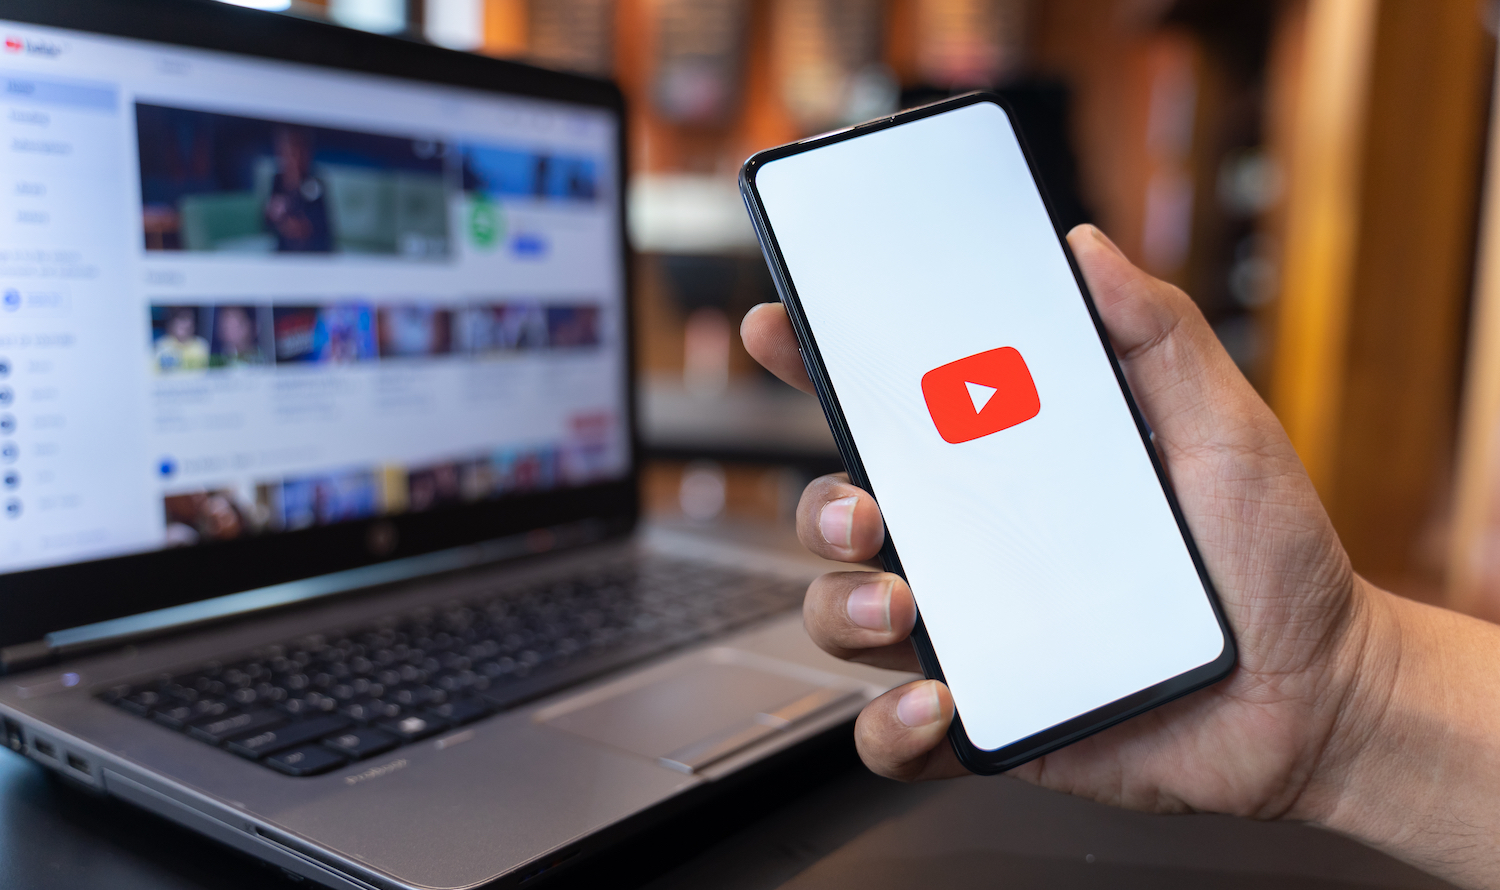 YouTube videos now link directly to concert tickets